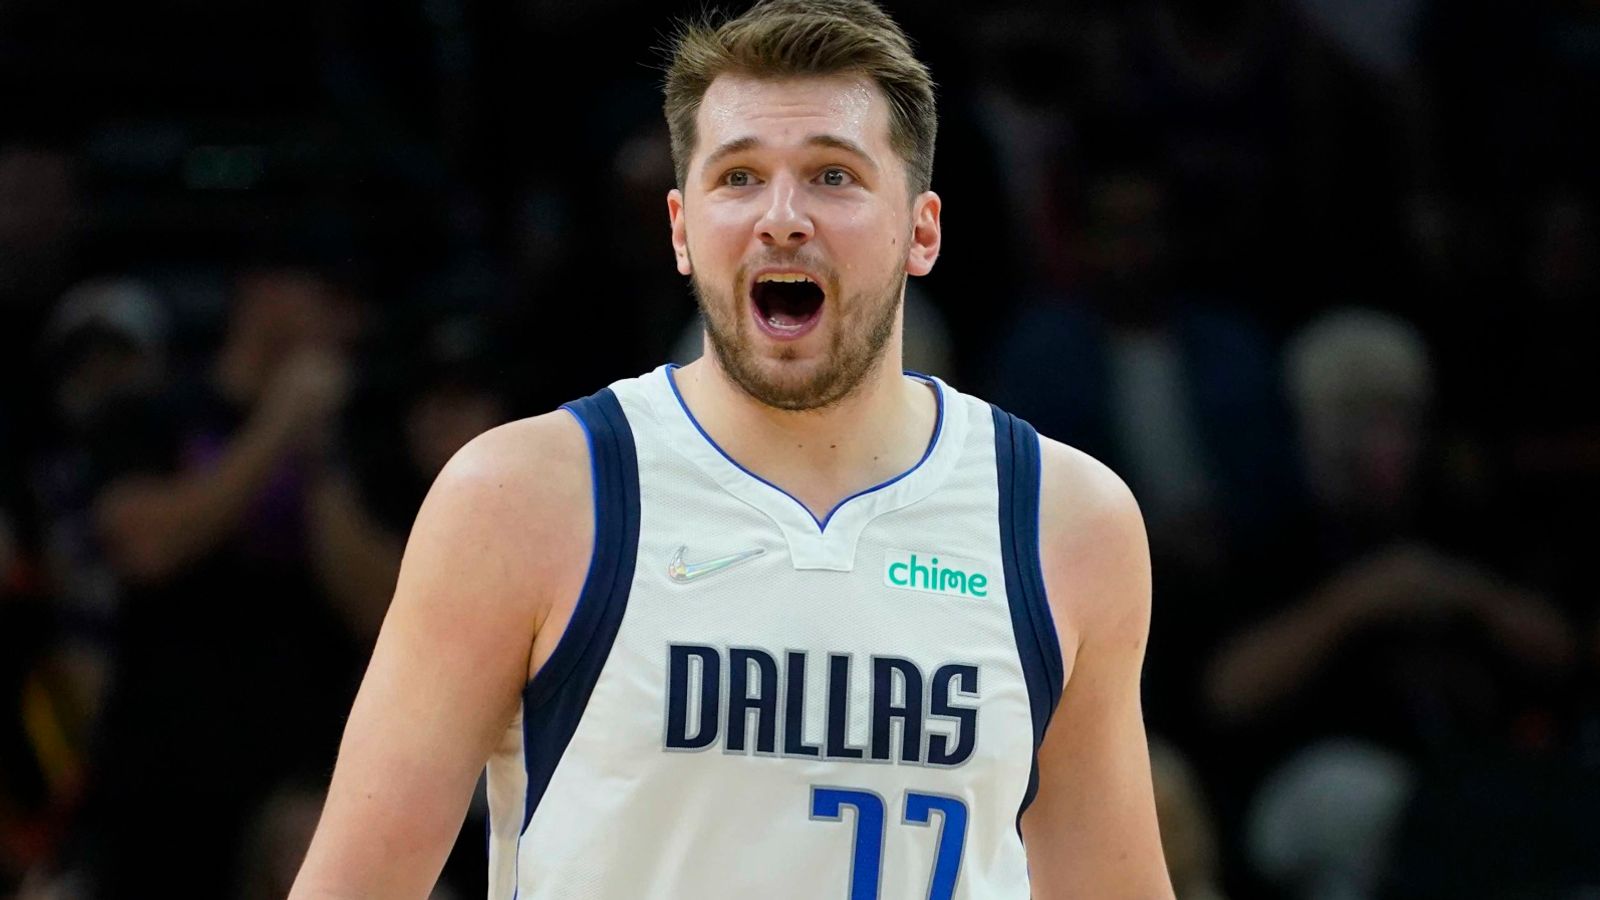 Dallas Mavs Shop on X: .@luka7doncic is ready to tip off the NBA